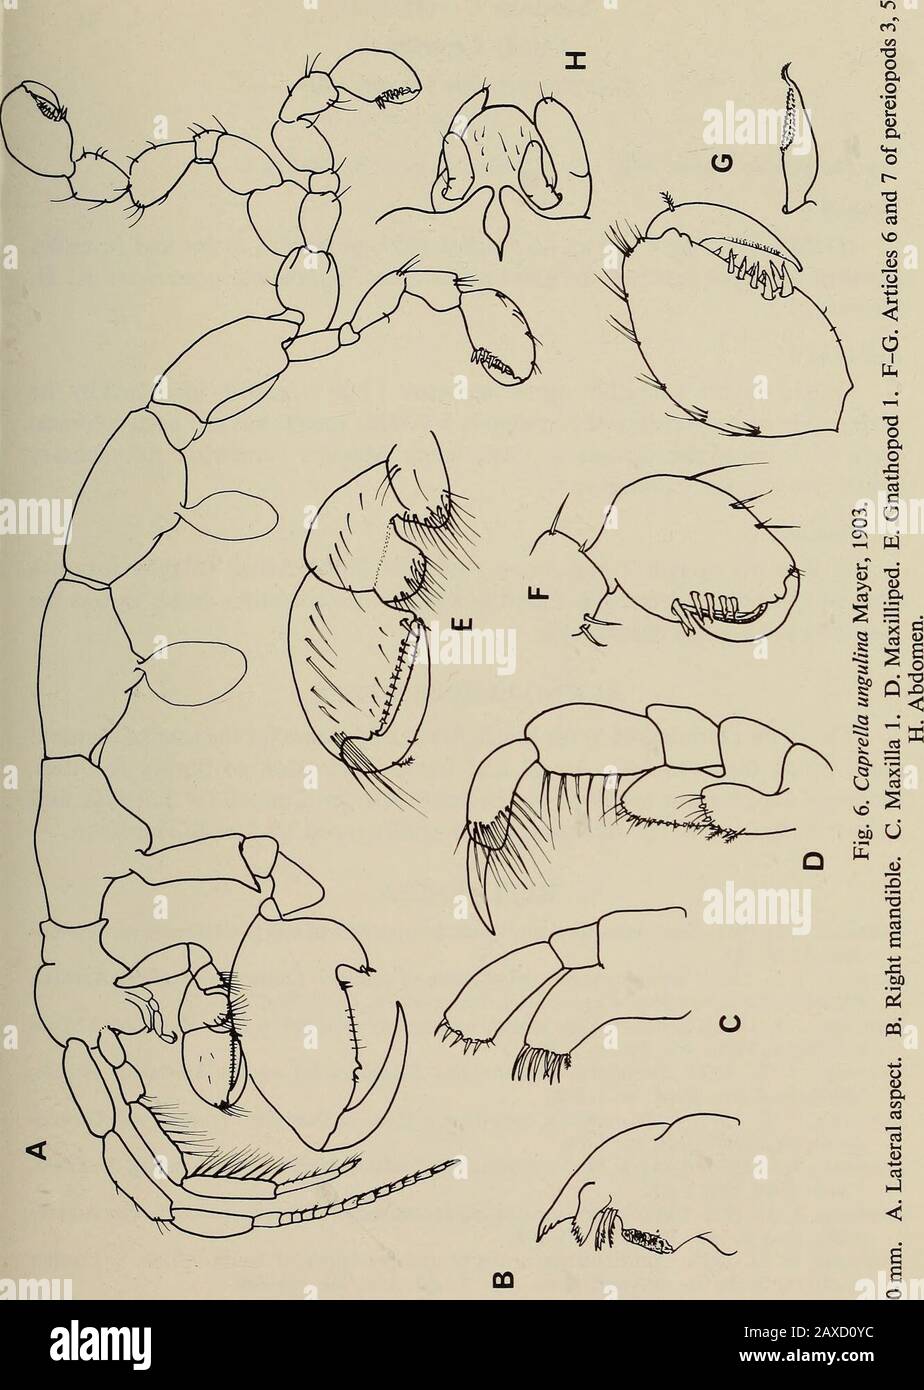 Annals of the South African Museum = Annale van die Suid-Afrikaanse Museum . DEEP-SEA AMPHIPODS FROM WEST OF CAPE POINT, SOUTH AFRICA 103. 104 ANNALS OF THE SOUTH AFRICAN MUSEUM Suborder CaprellideaFamily Caprellidae Caprella ungulina Mayer, 1903Fig. 6 Caprella ungulina Mayer, 1903: 127, pi. 5 (fig. 36), pi. 8 (figs 30-31). Records 33°50S 17°21E, 1 100 m, 25 August 1959, numerous males and juvenilesattached to appendages of the giant stone crab Neolithoides asperrimus K. H.Barnard. Remarks One of the few caprellids occurring below 1 000 m, readily identified by thestrong spines on the palms of Stock Photo